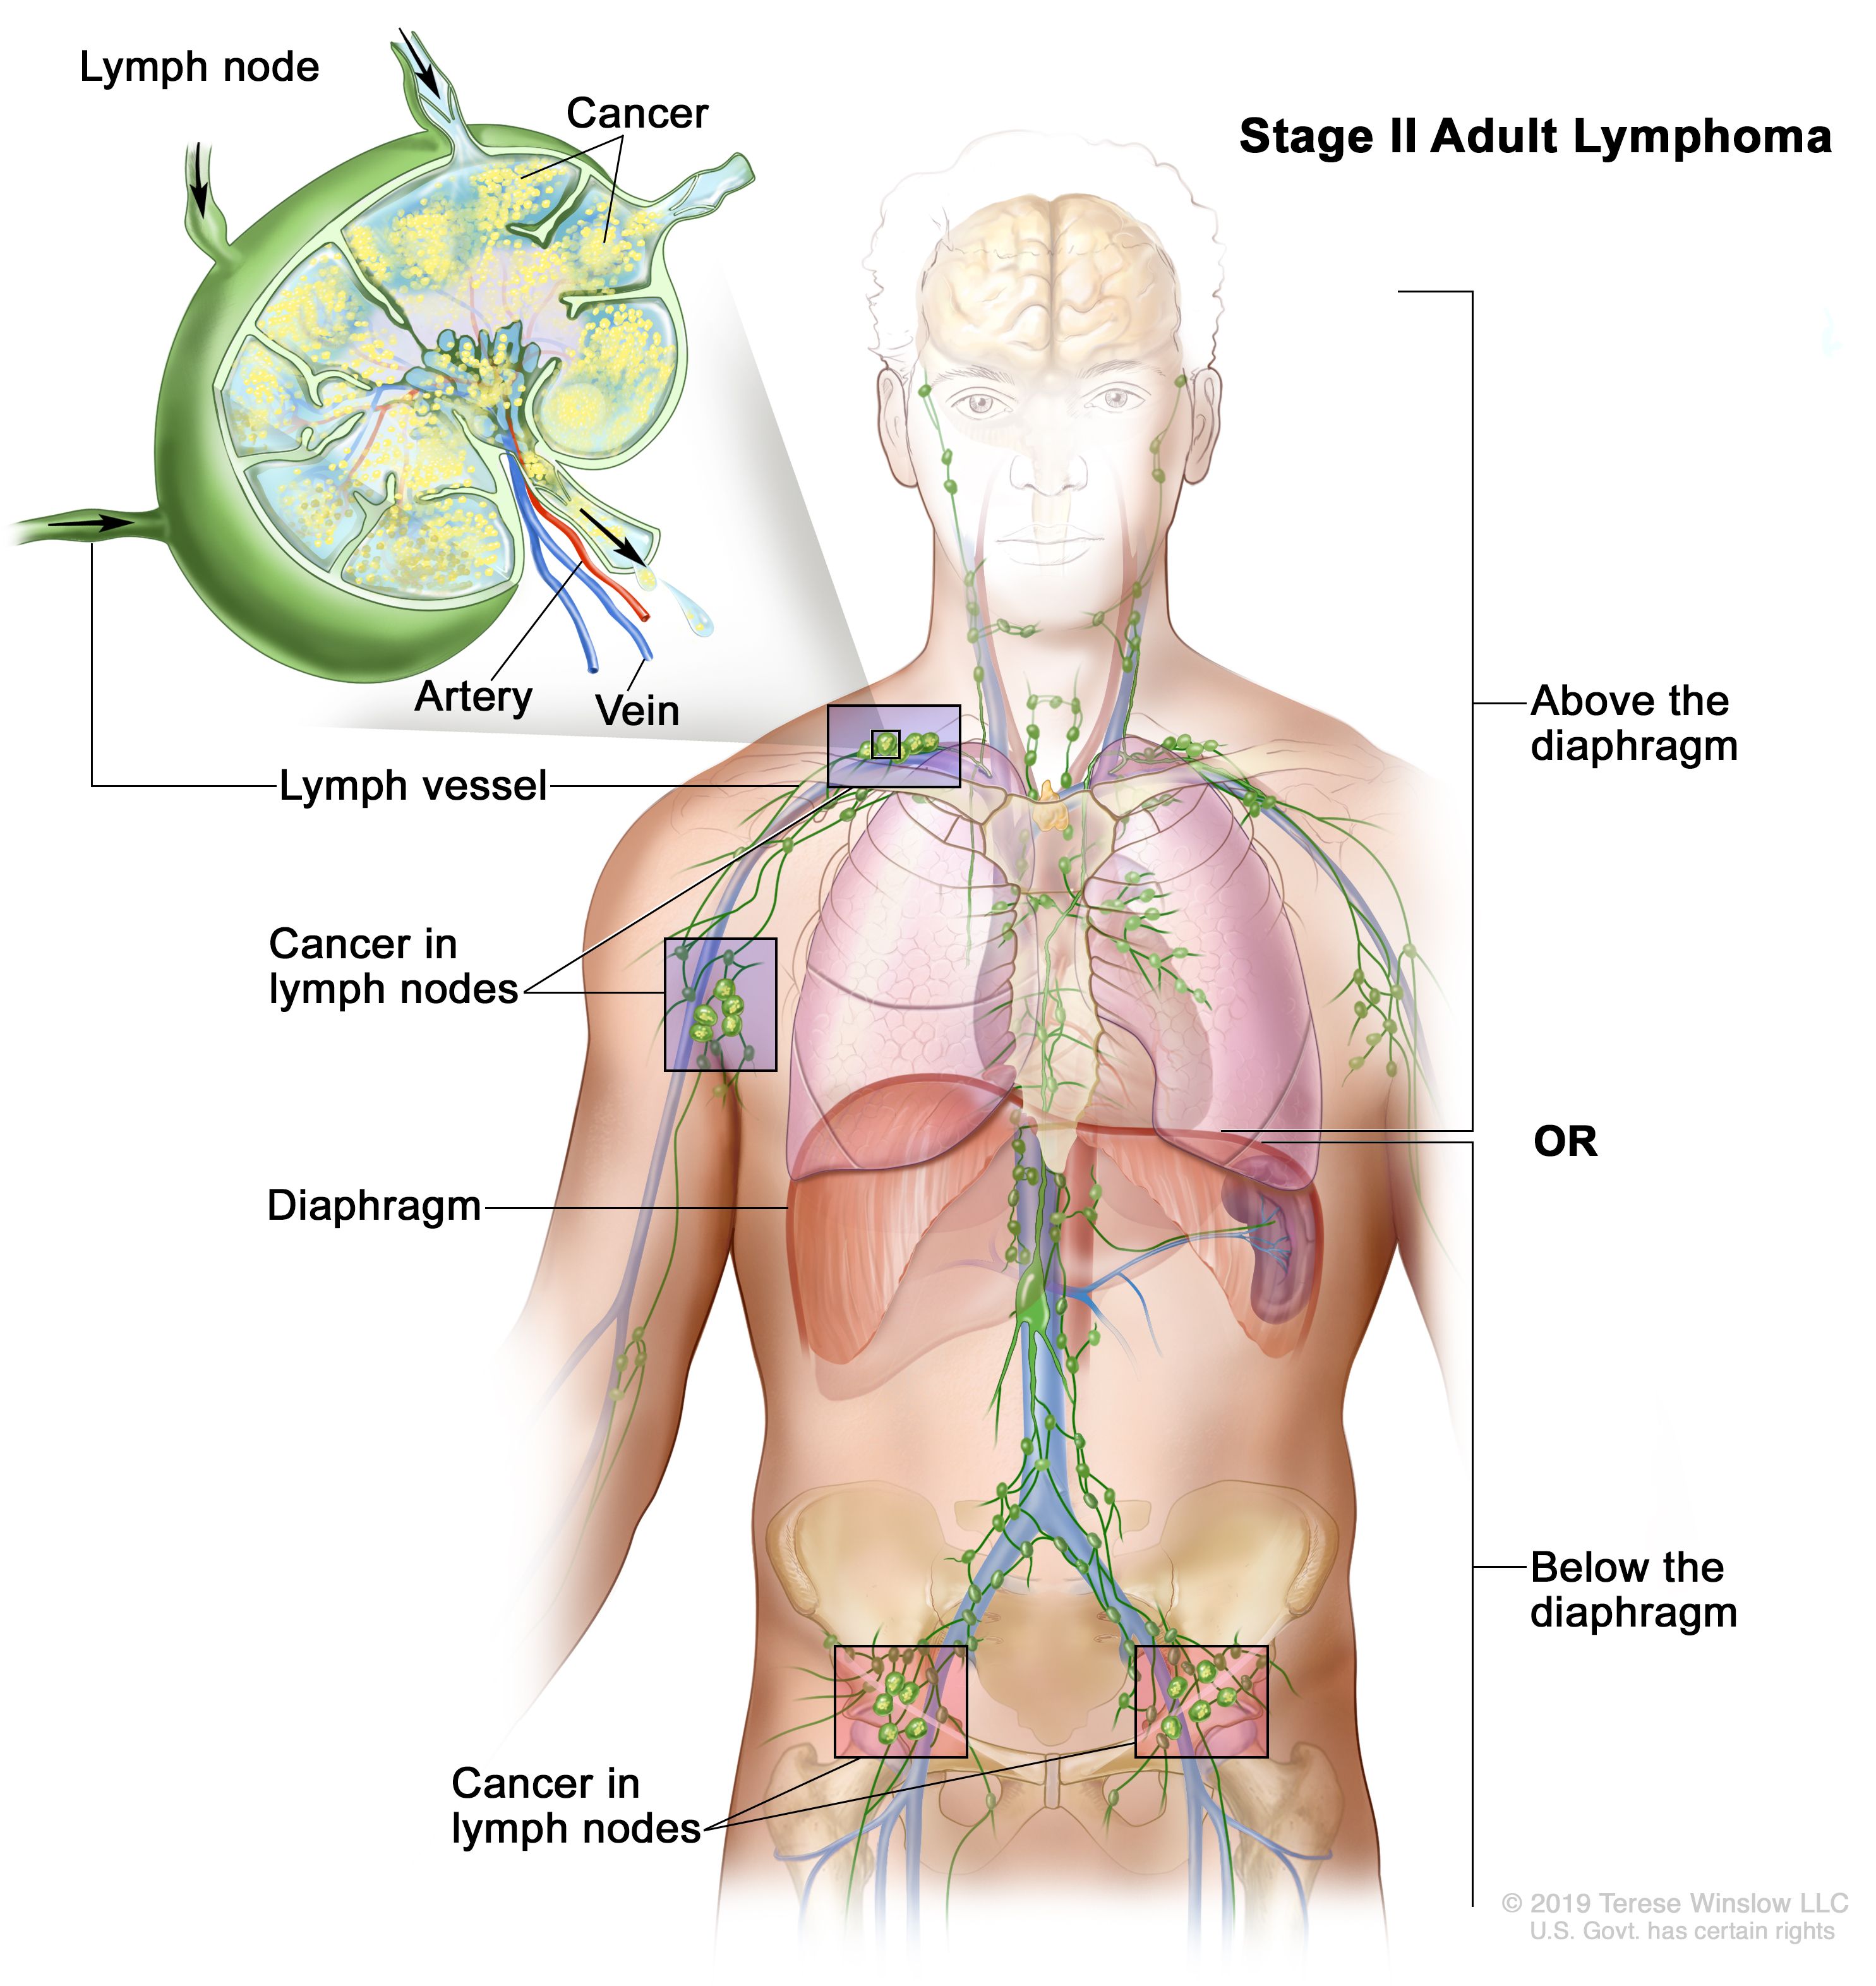 Lymphatic Drainage of the Head and Neck - TeachMeAnatomy